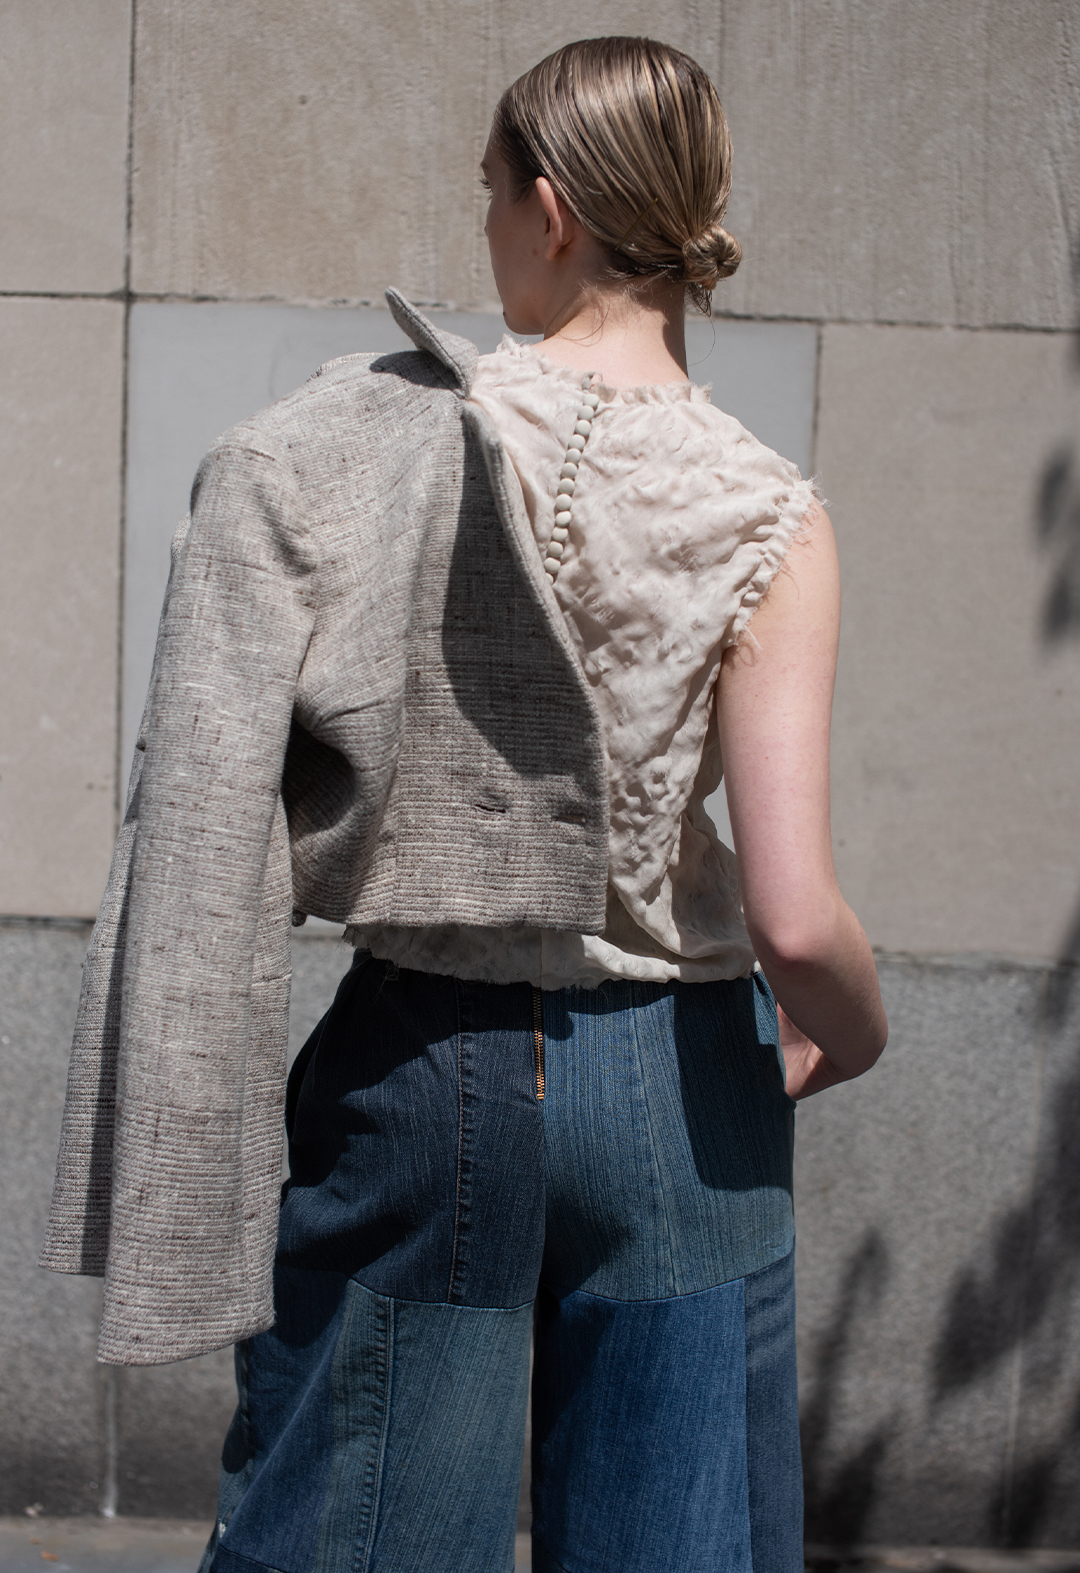 The photo is a back-view image of a girl displaying closure details of beige self-covered buttons on the hand-manipulated blouse and a brass metal zipper that is applied at the back of the denim pants. The wool jacket is placed on her shoulder as one of her hands is placed inside the pocket of the pants. Her head is turned slightly to the side. The background has multicolored gray and beige concrete panels. 